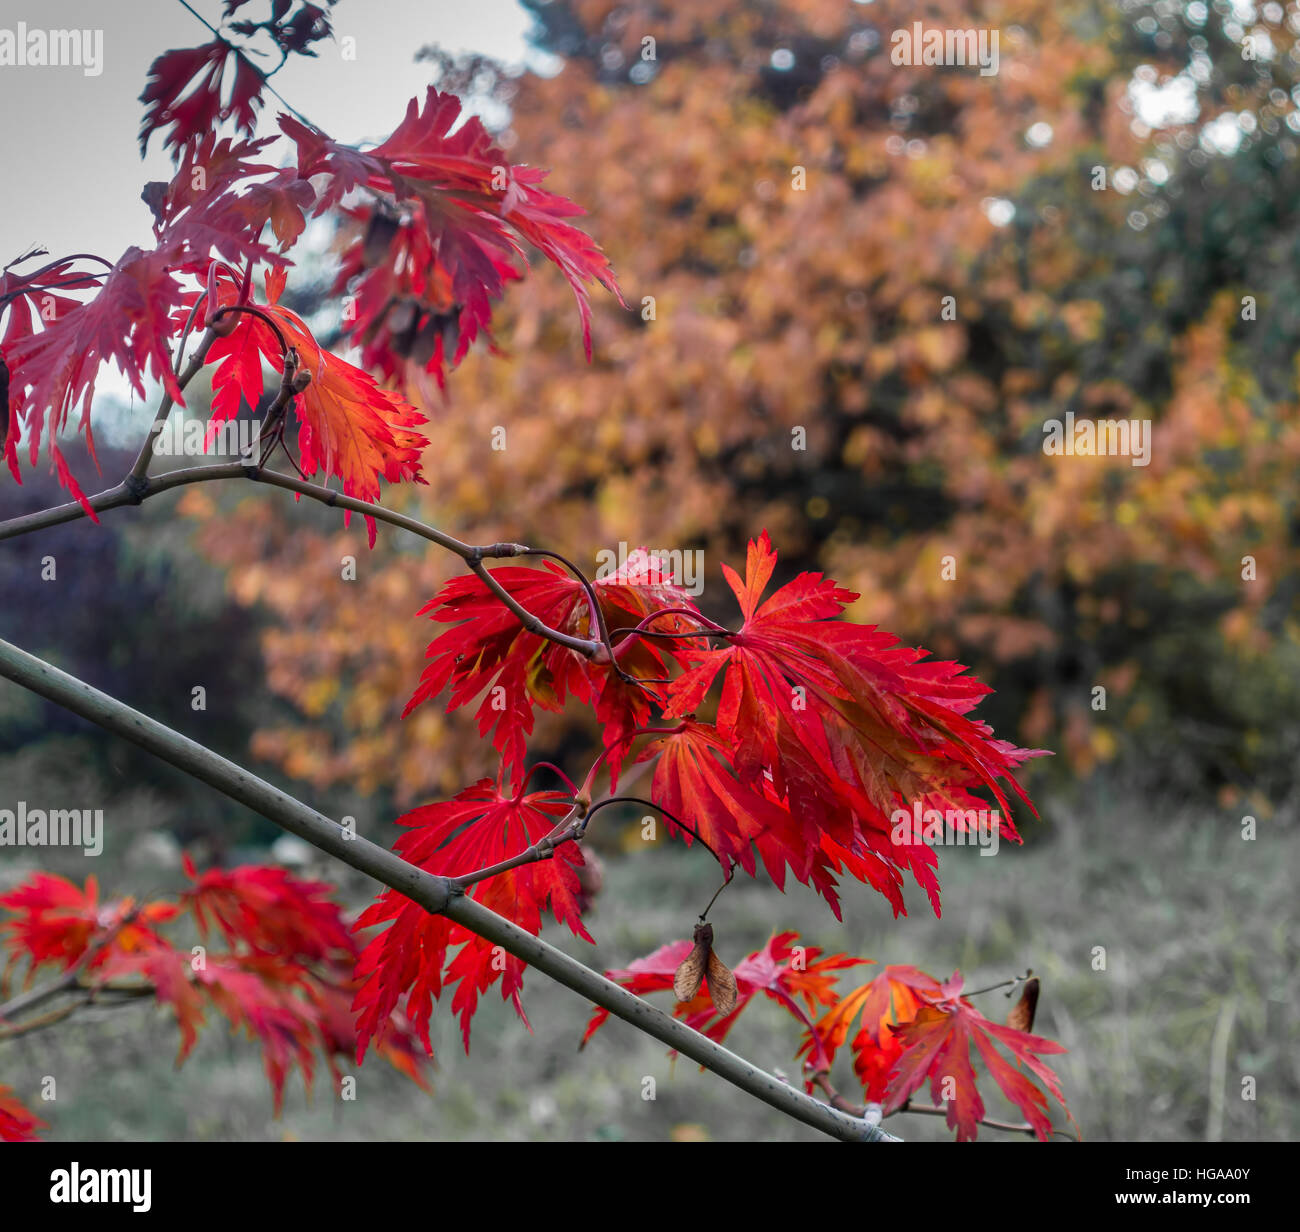 Closeup shot of red  leaves on a branch in Autumn. Stock Photo